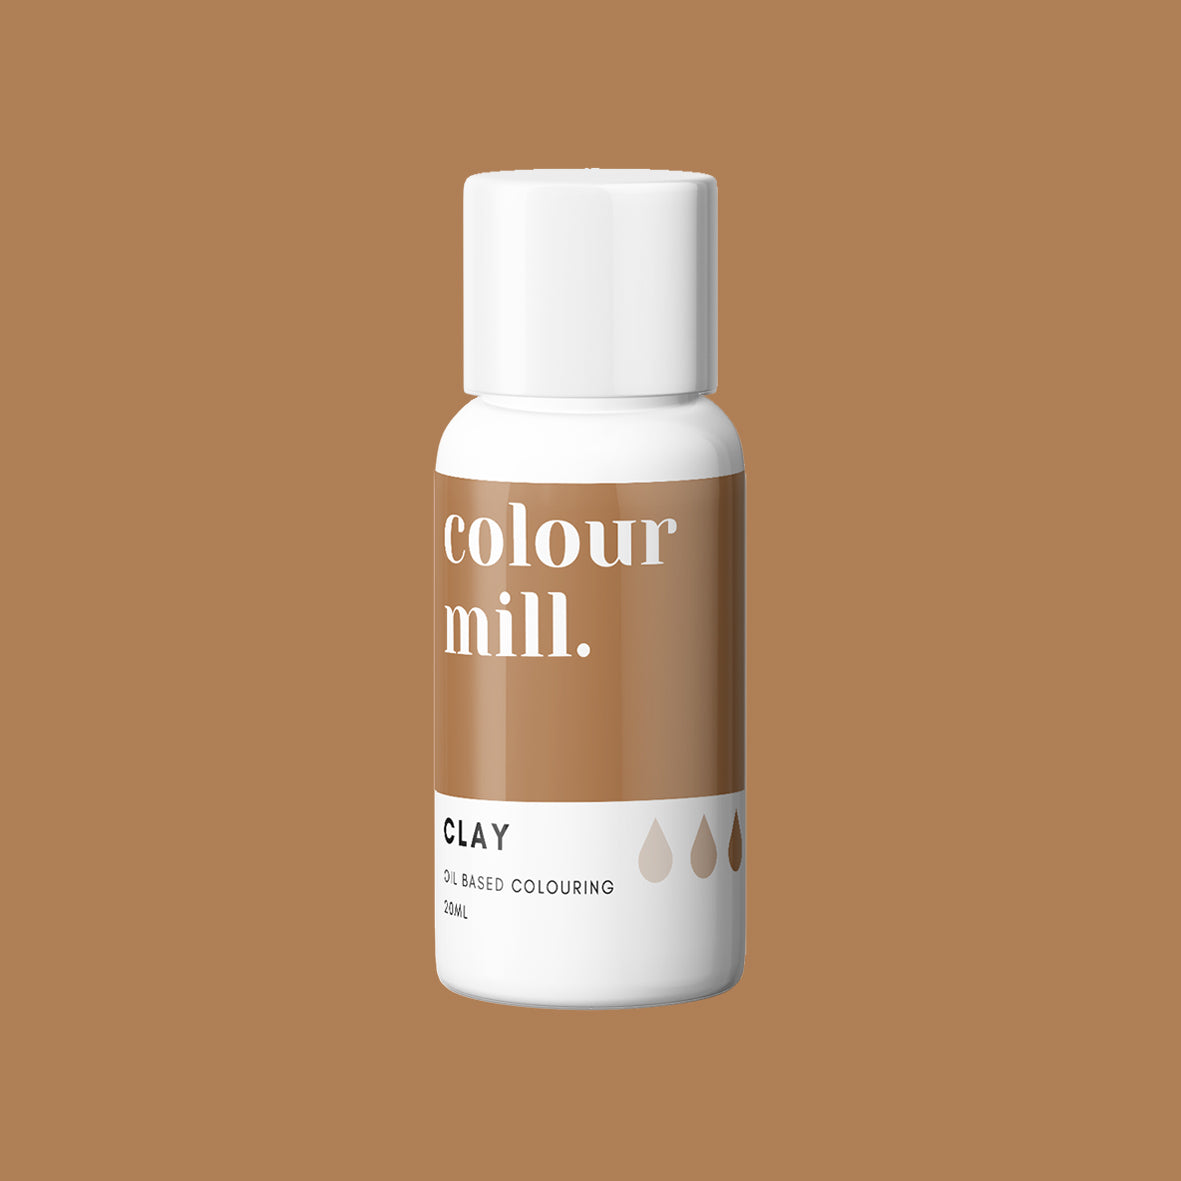 CLAY oil based concentrated icing colouring 20ml